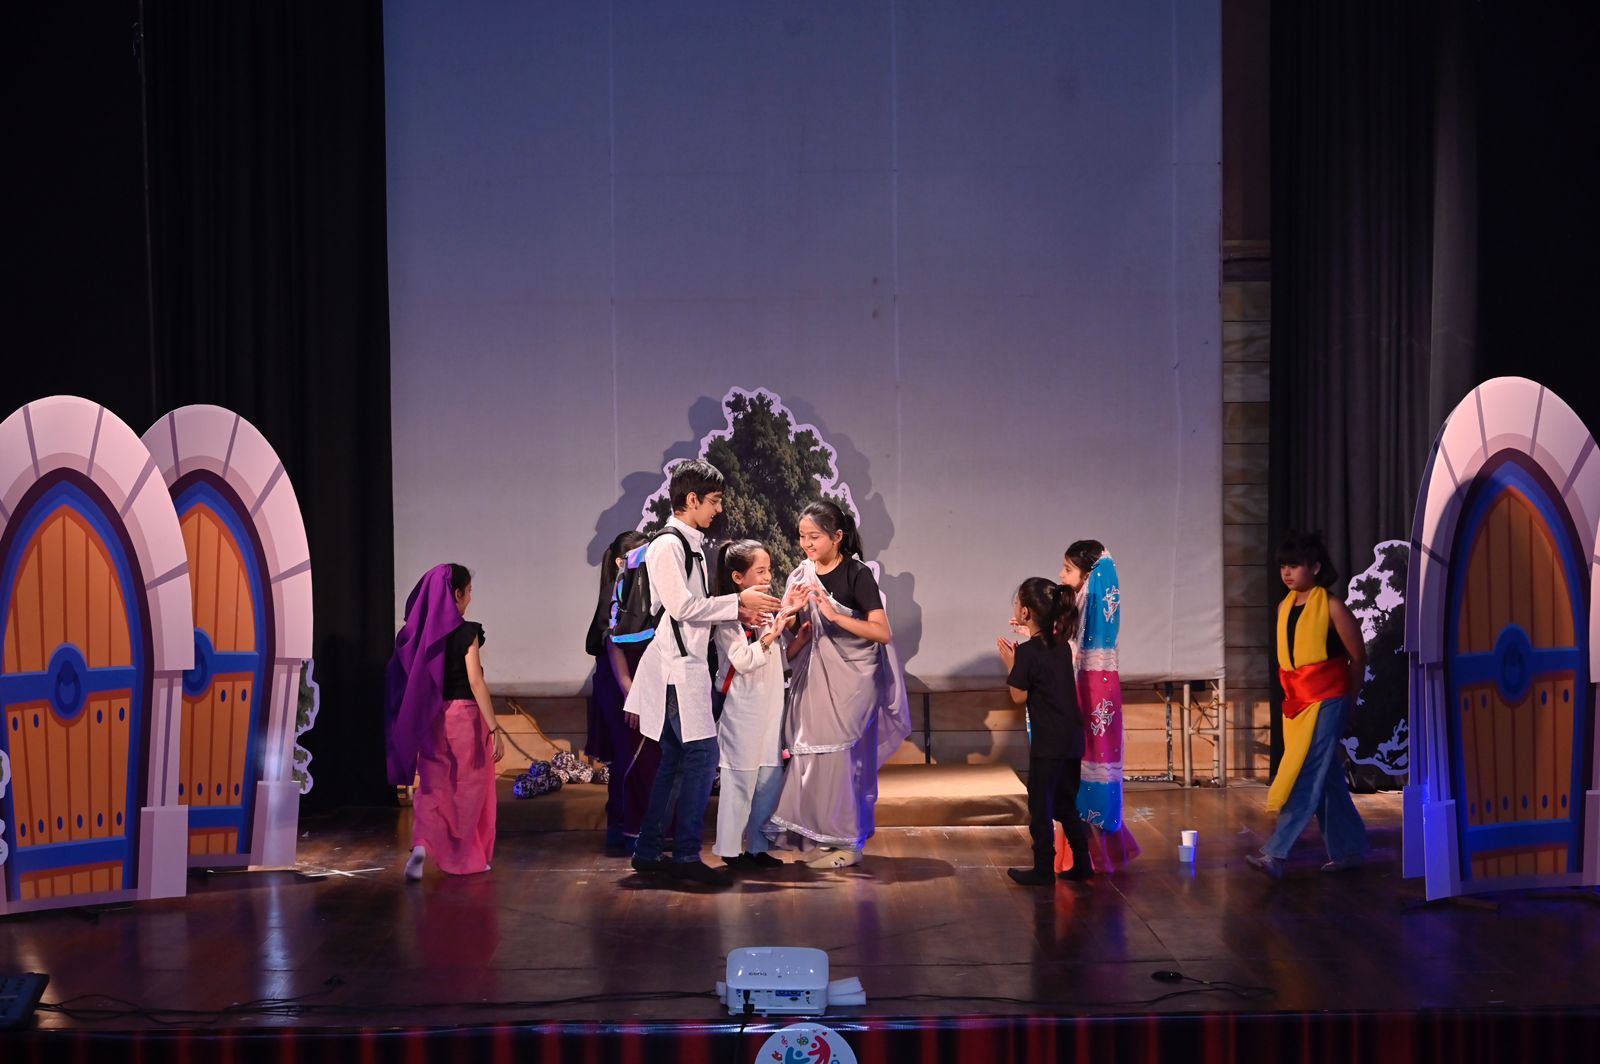 unique workshop-based theatre production held at International Baudh Shodh Sansthan, on 25th May